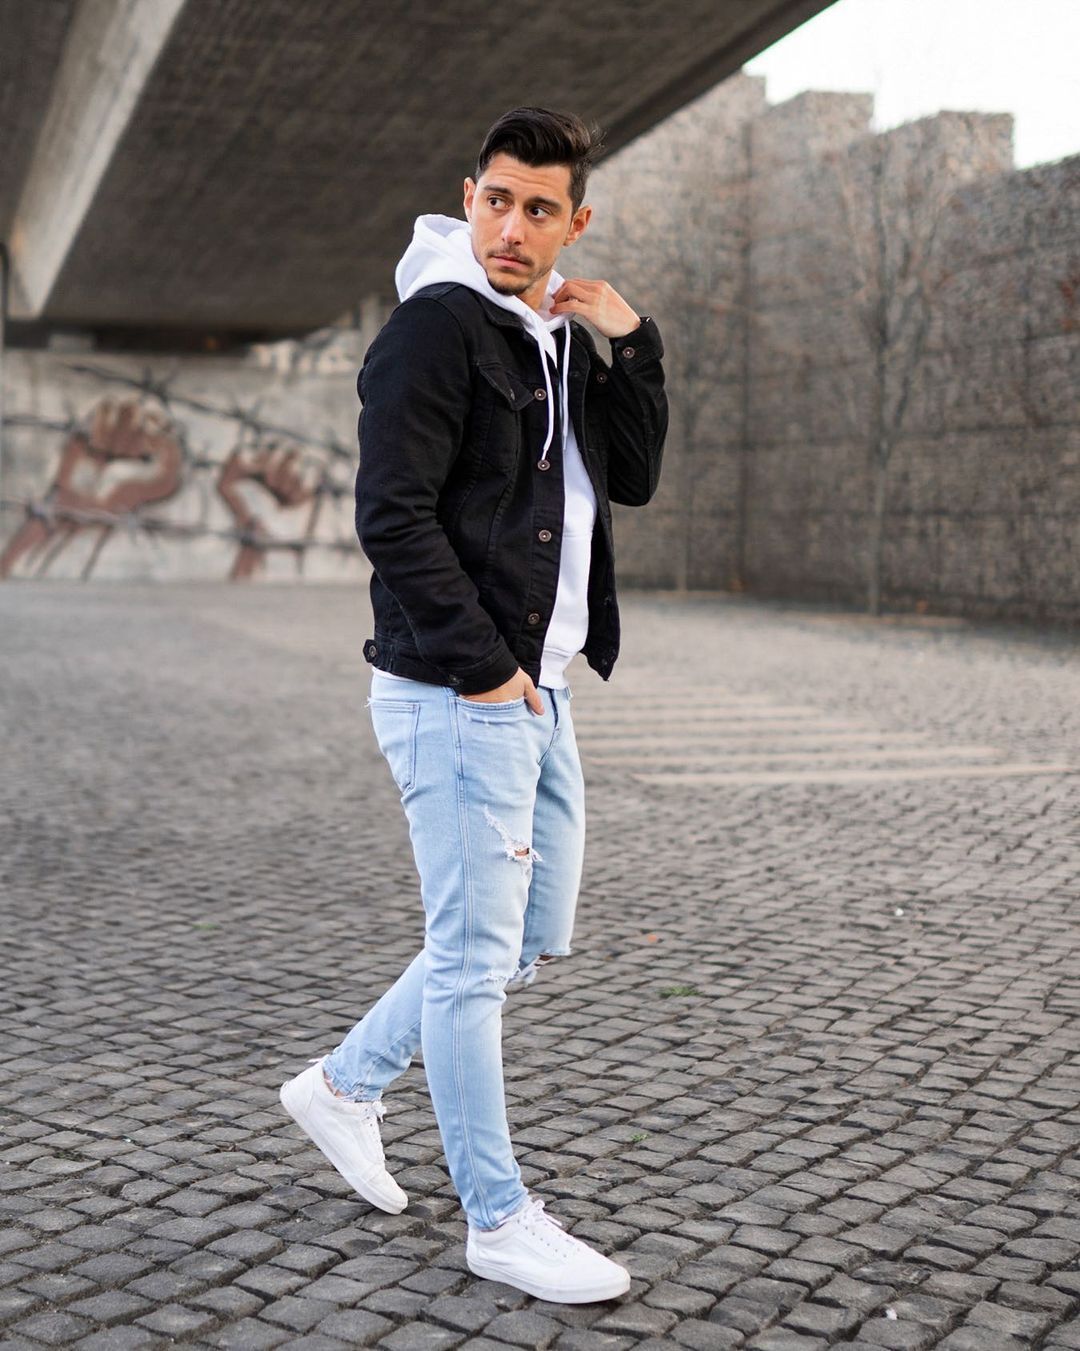 874 Likes, 121 Comments - Philip Deml™ | Frankfurt (@philipdeml) on  Instagram: “Enjoy the moment, #liveinlevis … | Hoodie fashion, Mens winter  fashion, Mens outfits